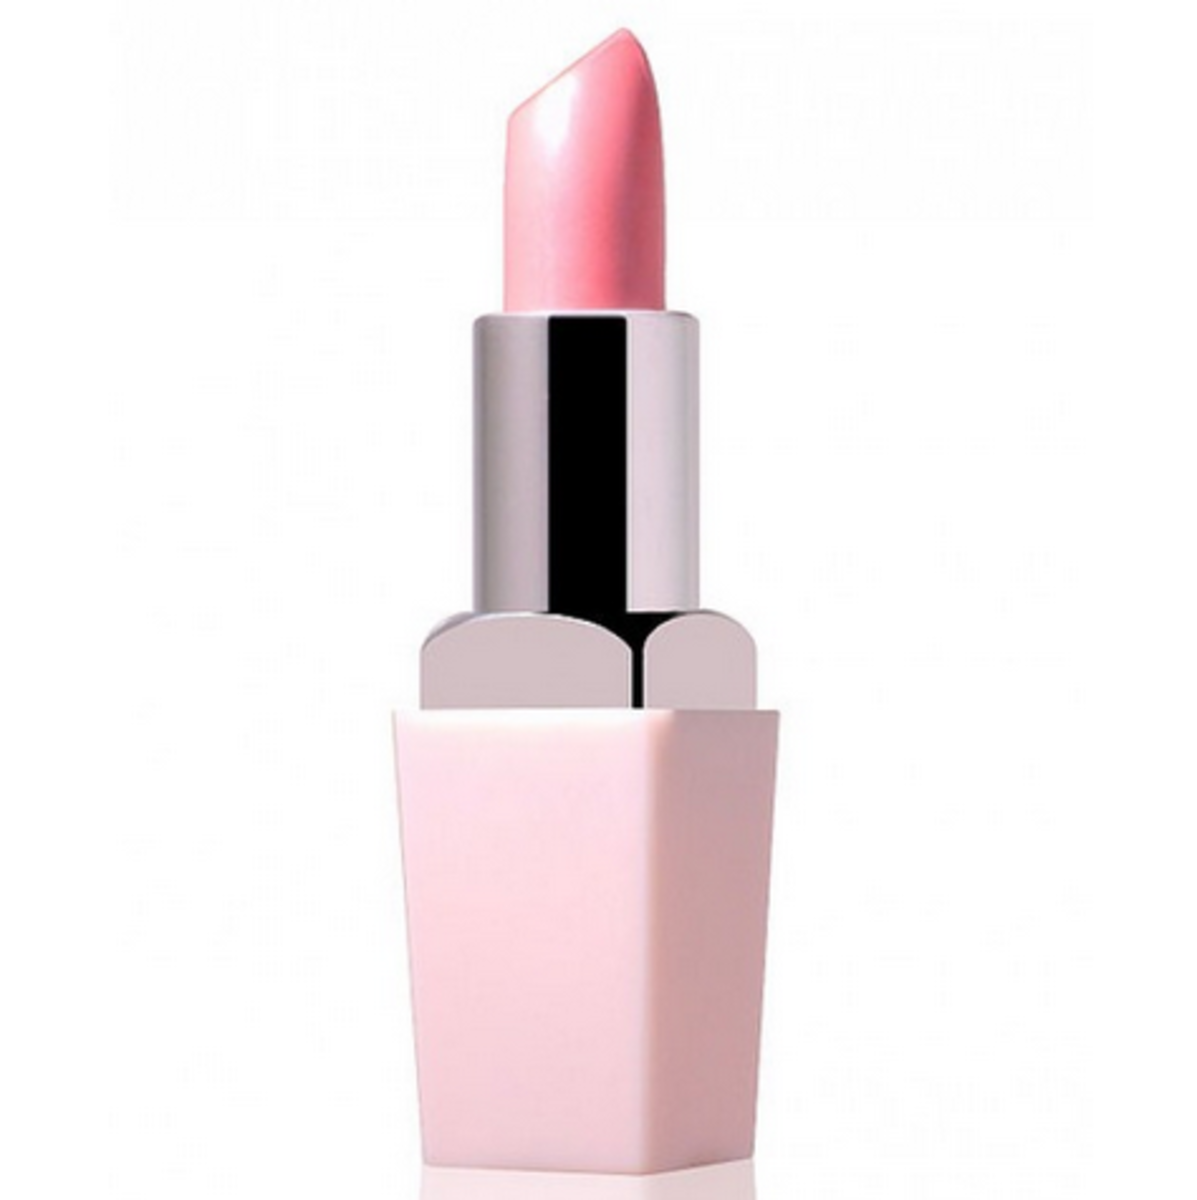 Pink lipstick in a dream could emphasize the need to verbally express caring and affection.